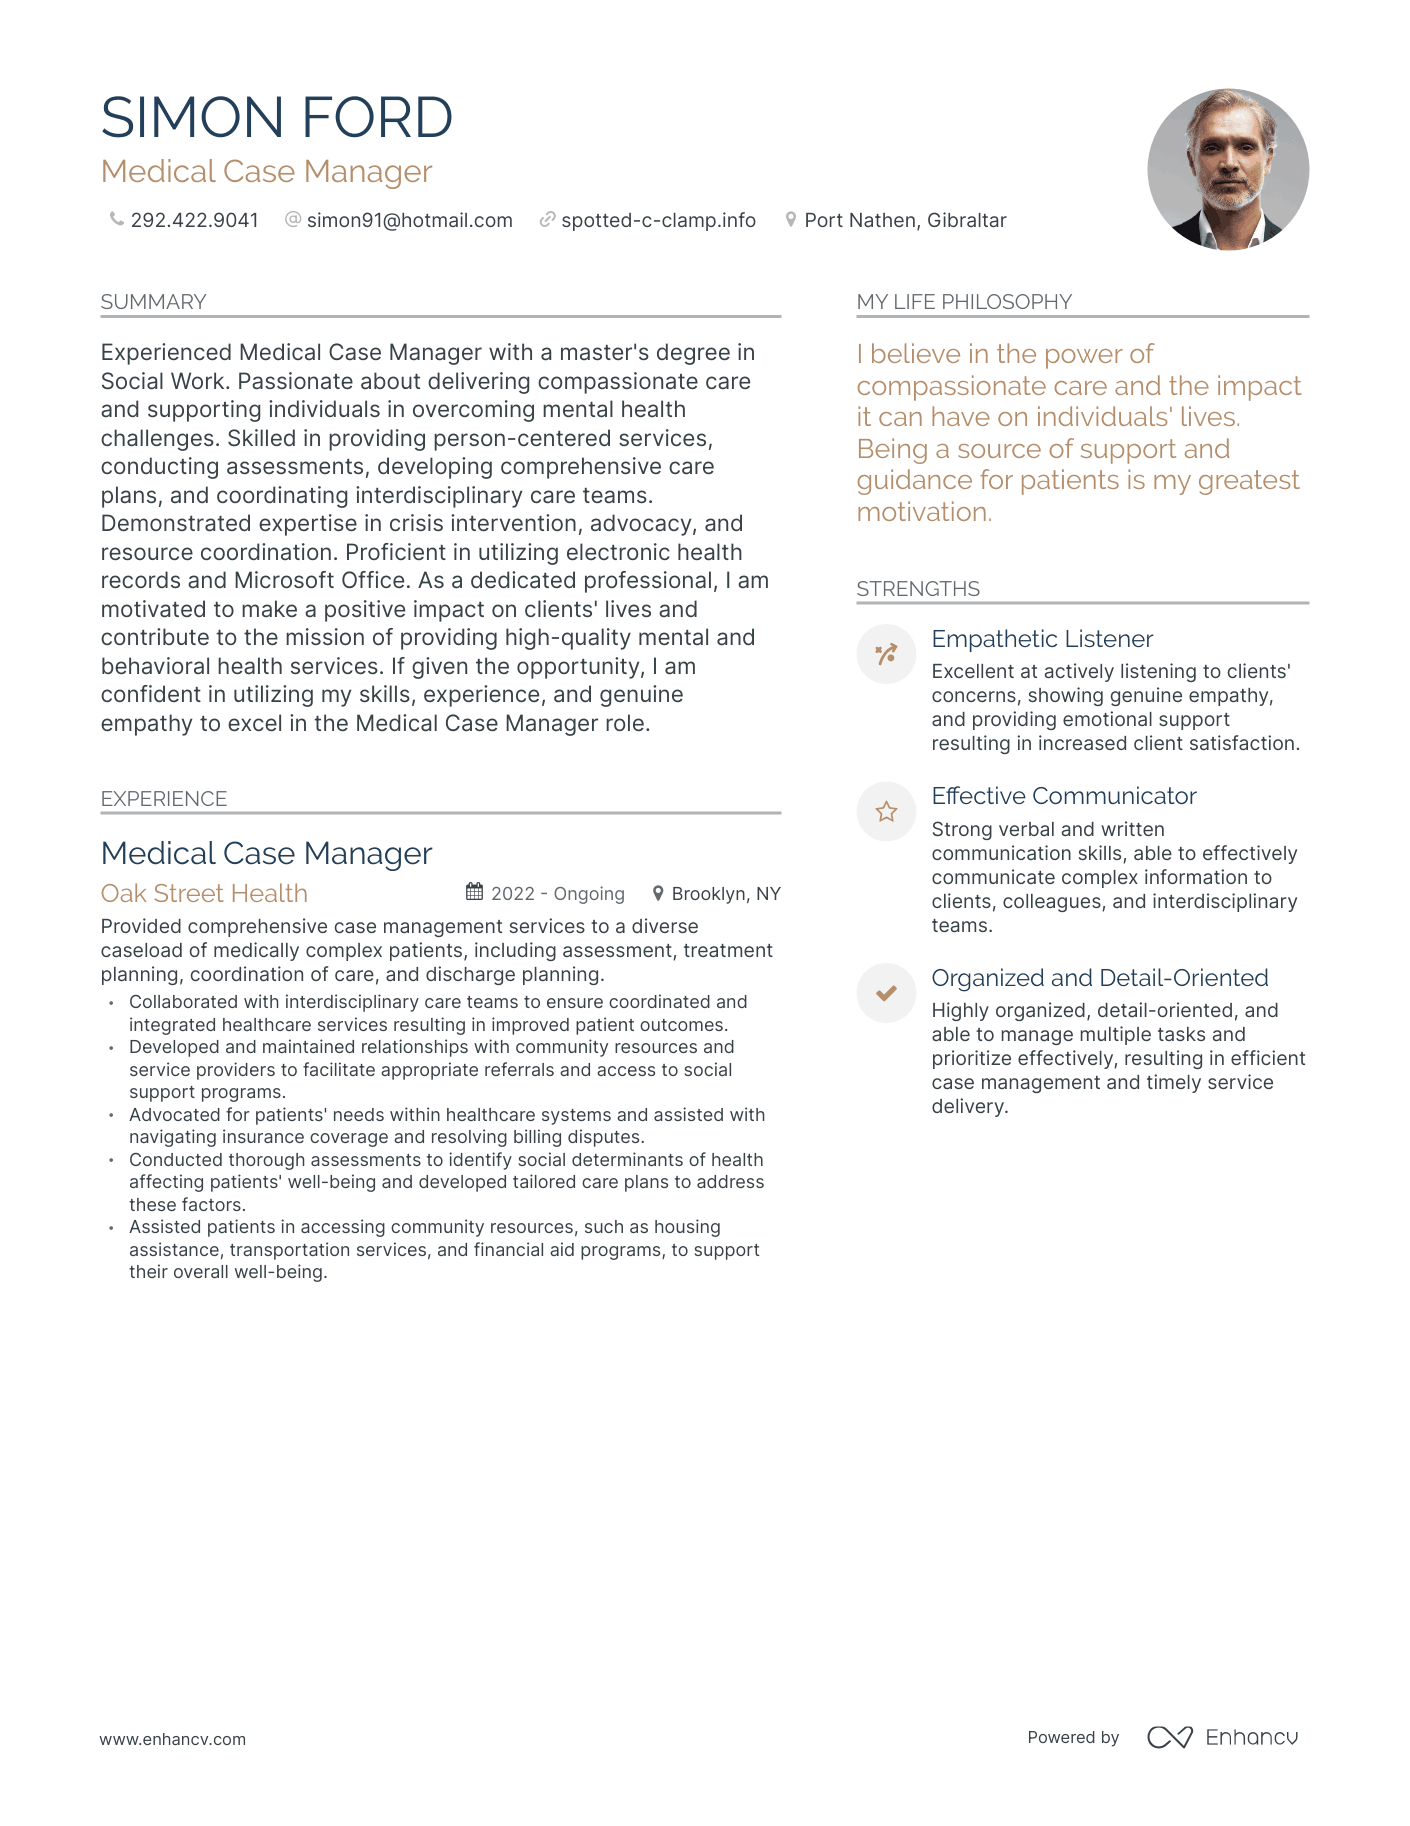 Medical Case Manager resume example